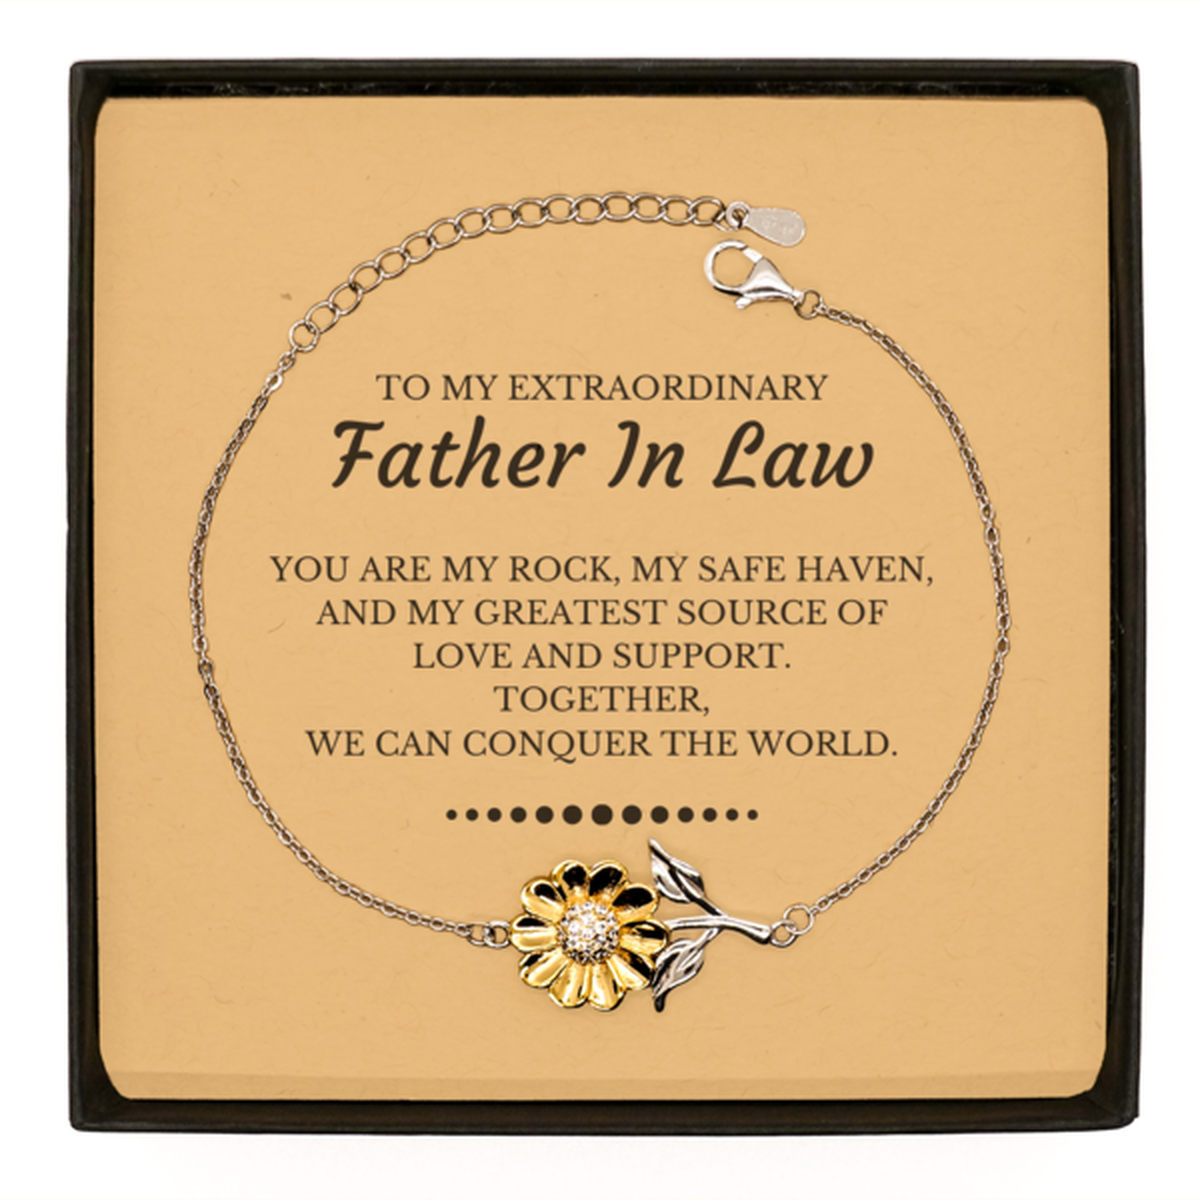 To My Extraordinary Father In Law Gifts, Together, we can conquer the world, Birthday Sunflower Bracelet For Father In Law, Christmas Gifts For Father In Law